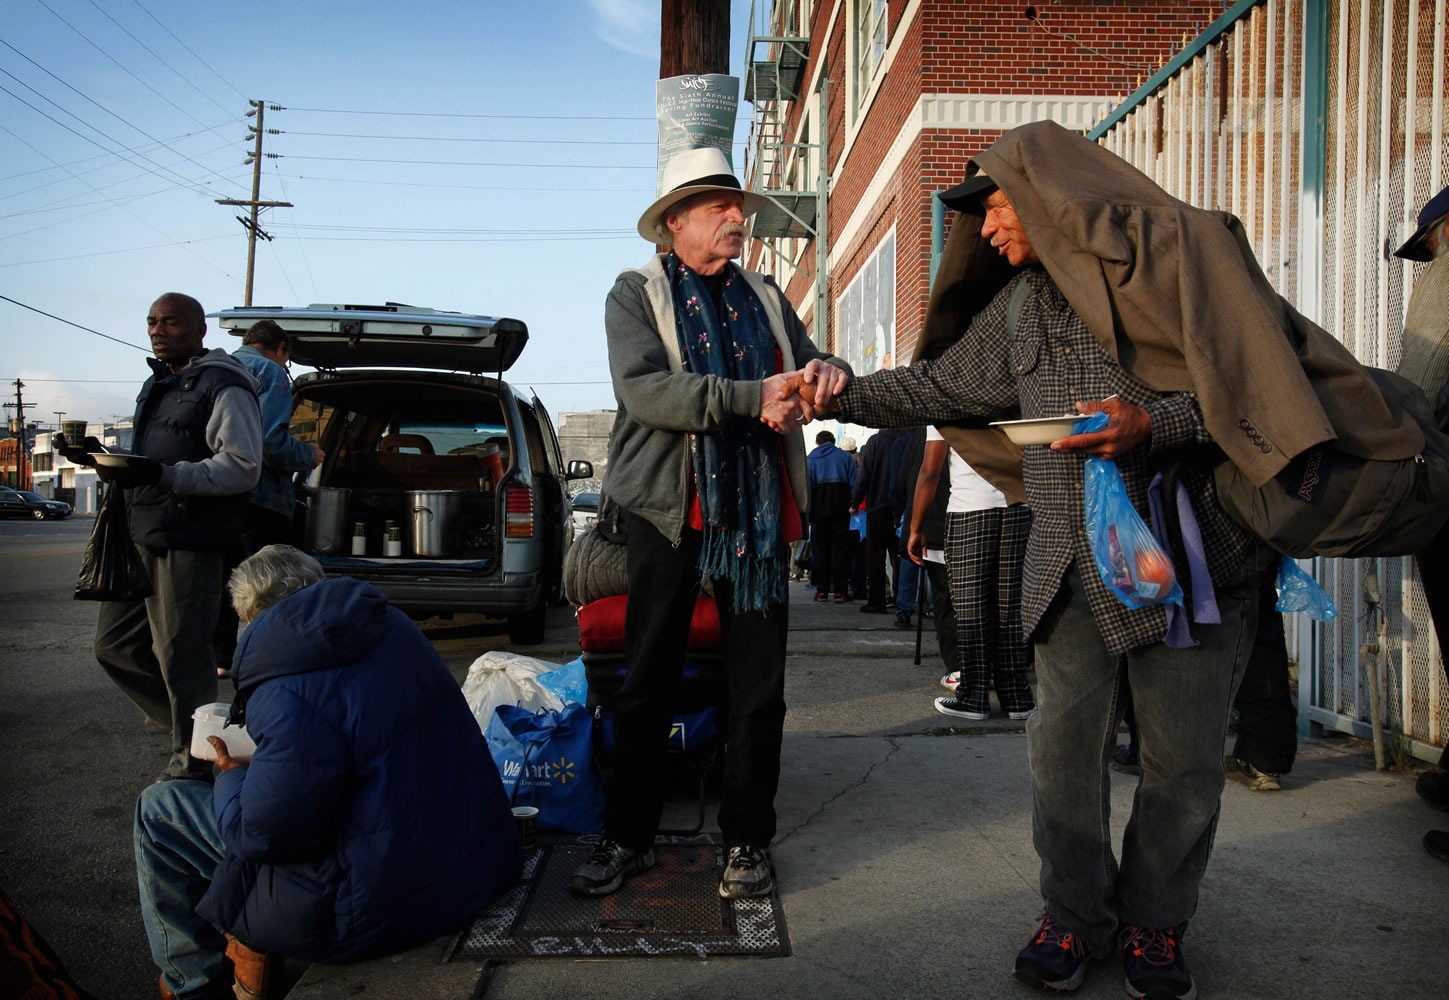 Jeff Dietrich and Catherine Morris came to skid row to help ease despair.